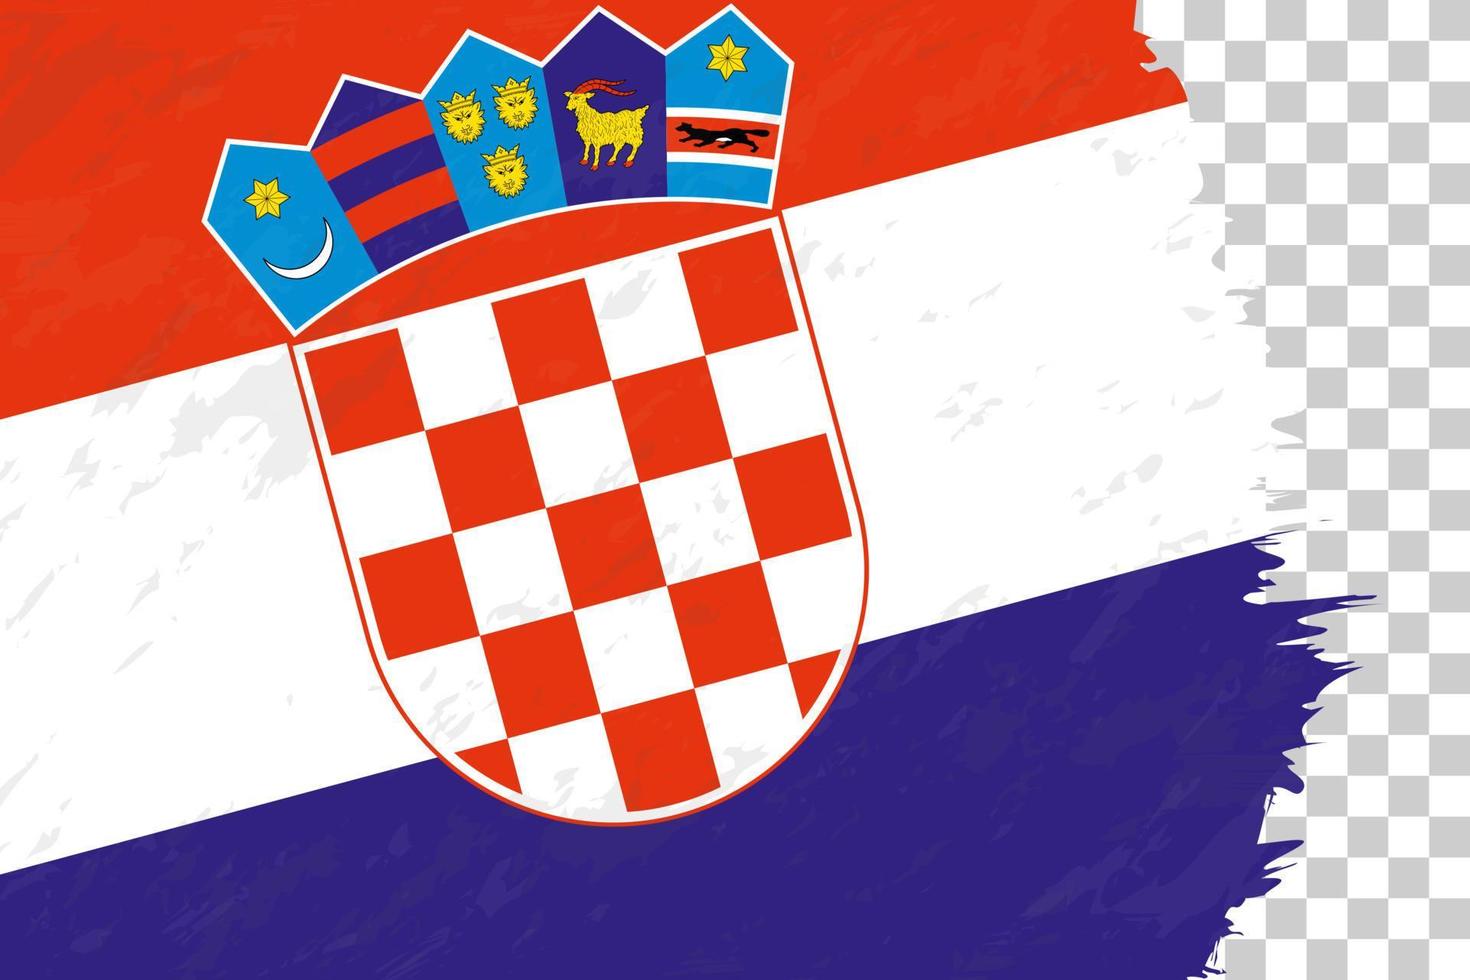 Horizontal Abstract Grunge Brushed Flag of Croatia on Transparent Grid. vector